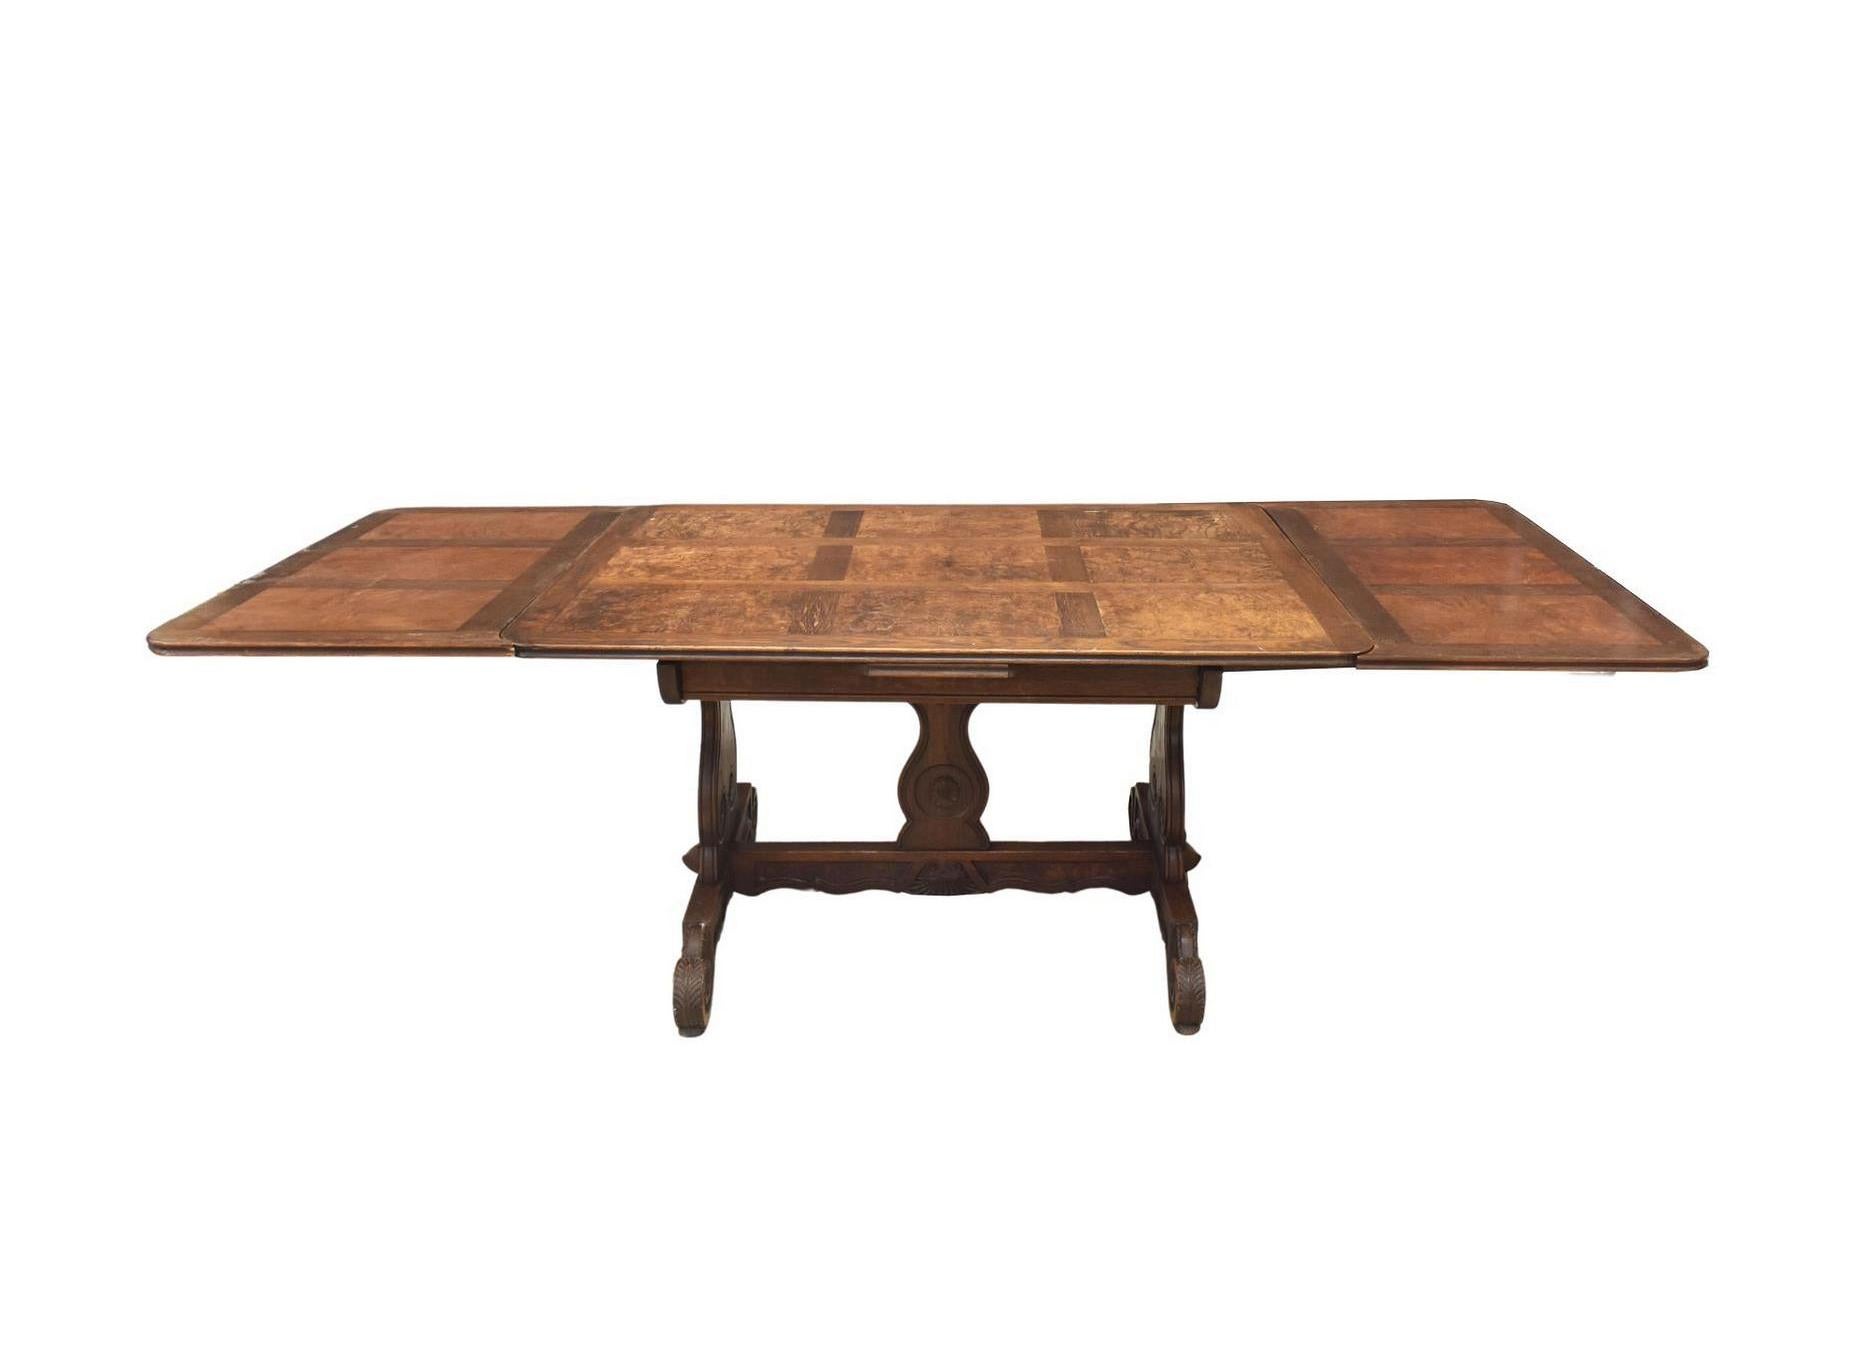 Antique French Oak & Elm Trestle Base Extension Dining Table In Good Condition For Sale In Sheridan, CO